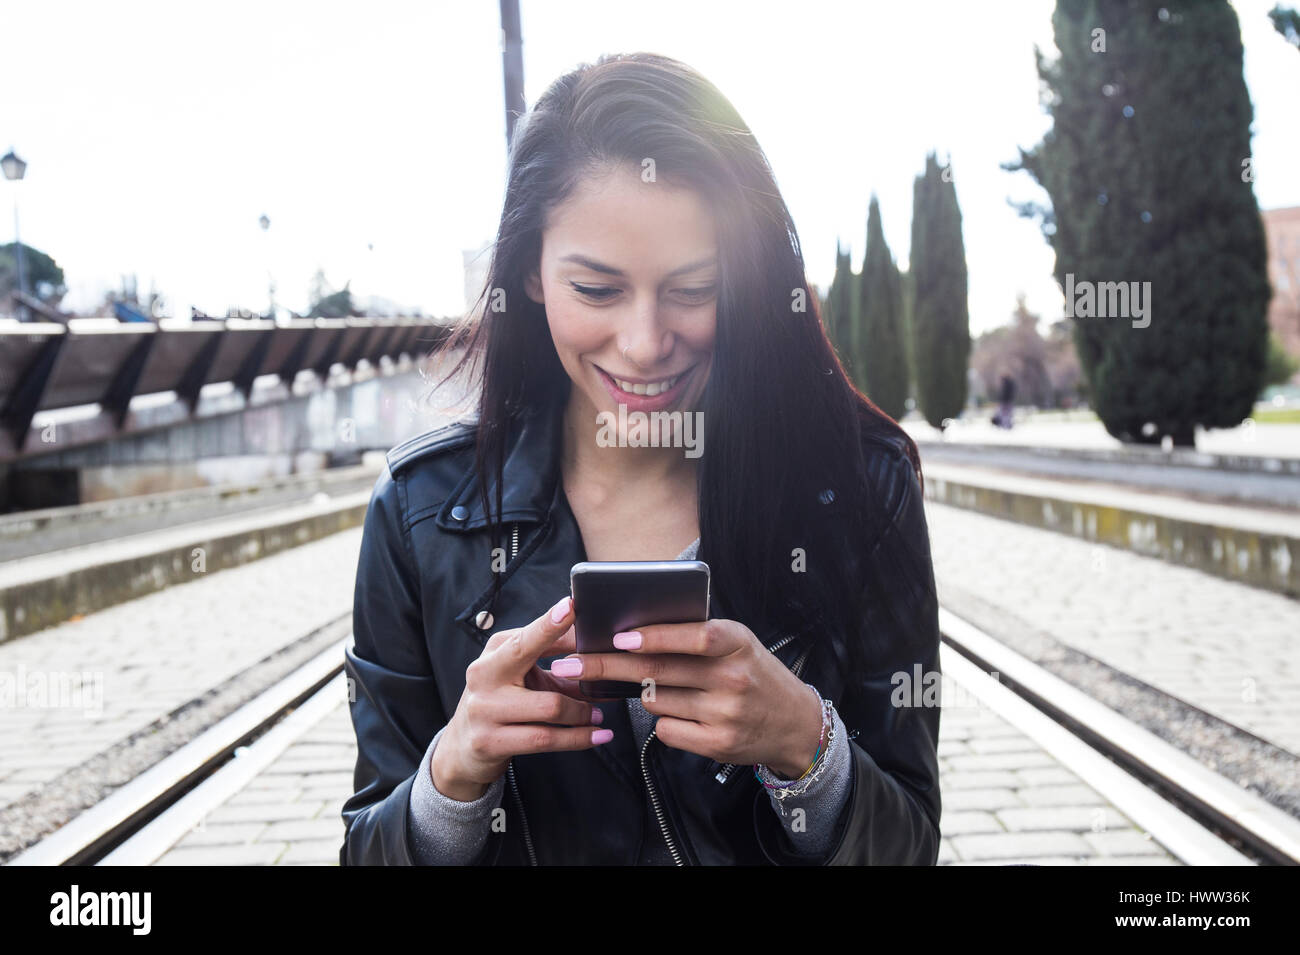 Portrait of smiling young woman  wearing black leather jacket looking at cell phone Stock Photo